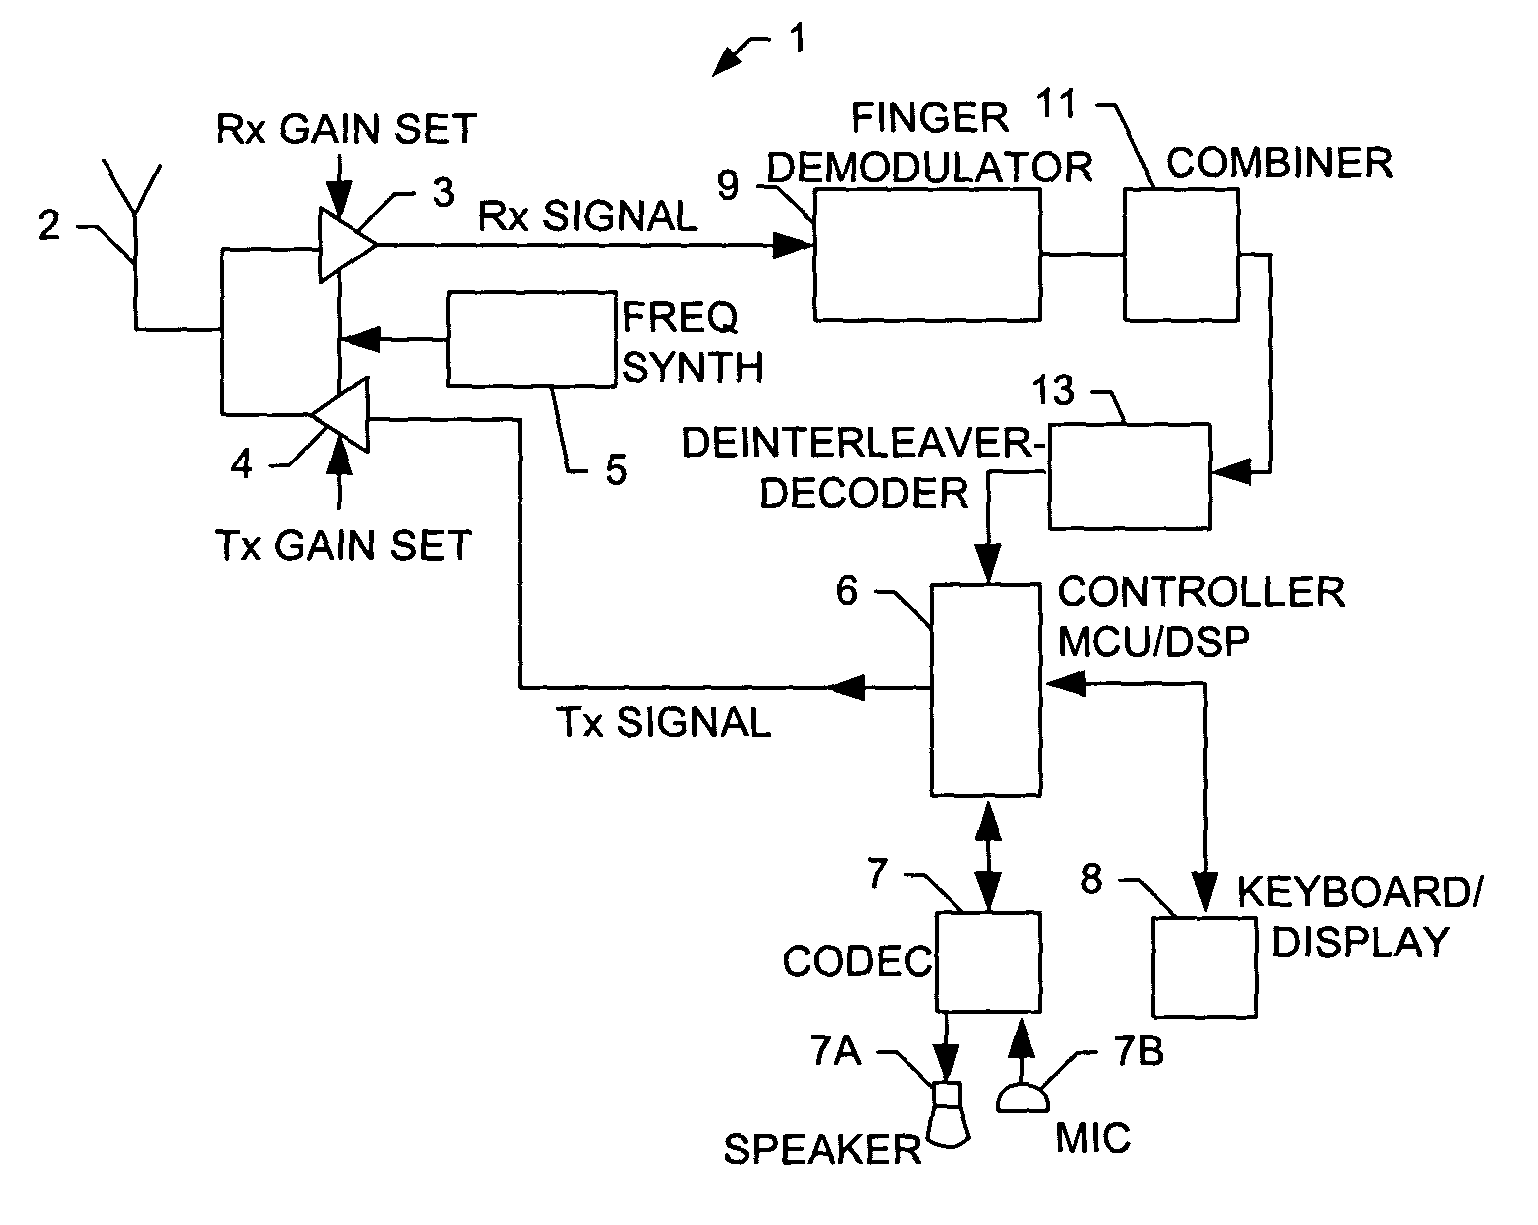 Interference suppression in a CDMA receiver during at least one of idle state and access state operation